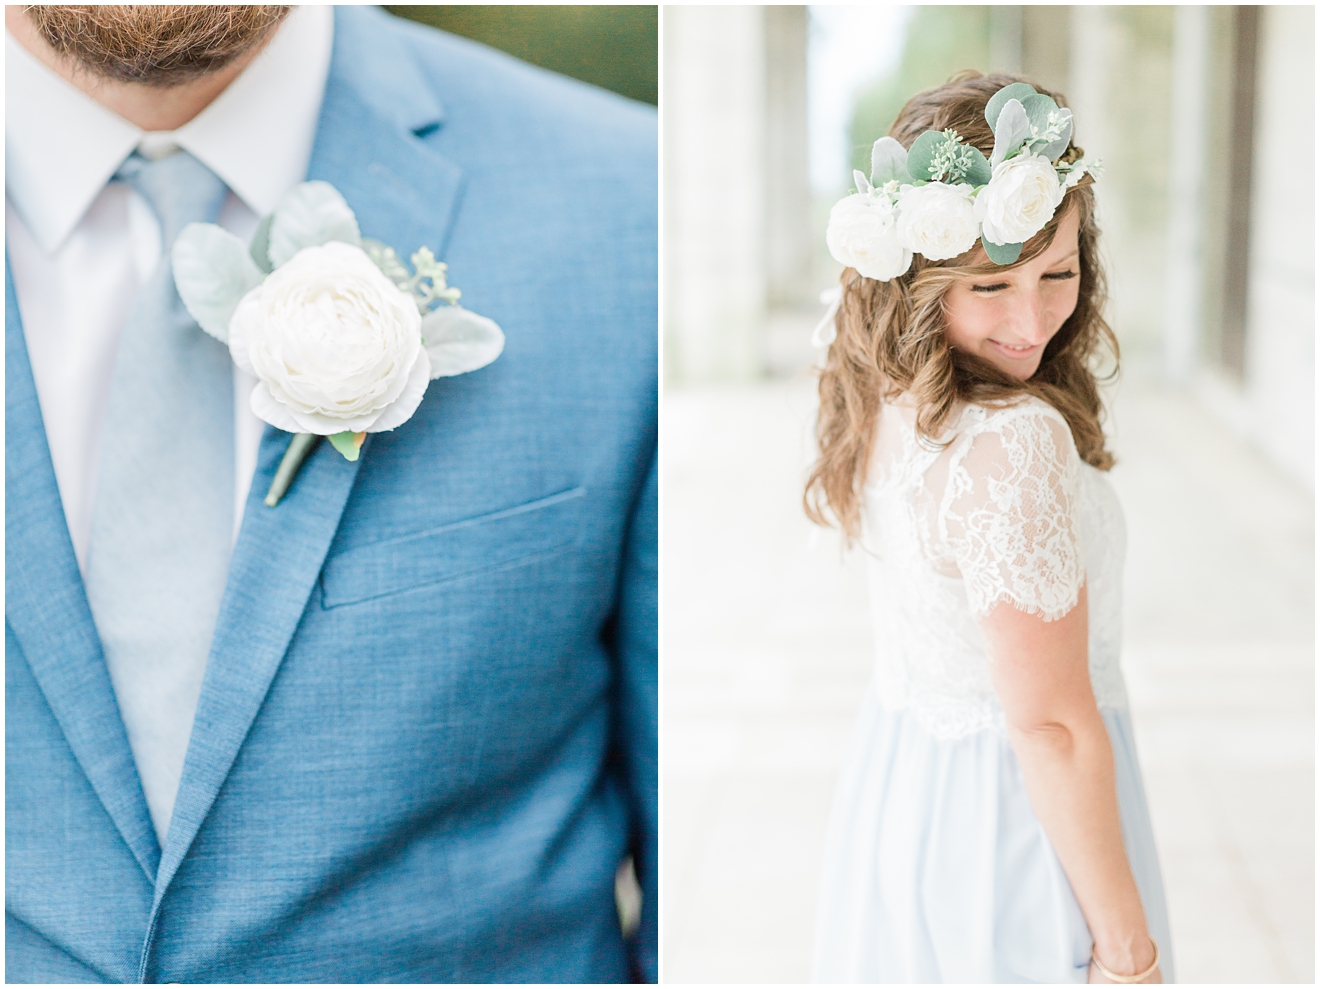 outfit-inspiration-for-romantic-anniversary-elopement-wedding-photos-in-blue-tones